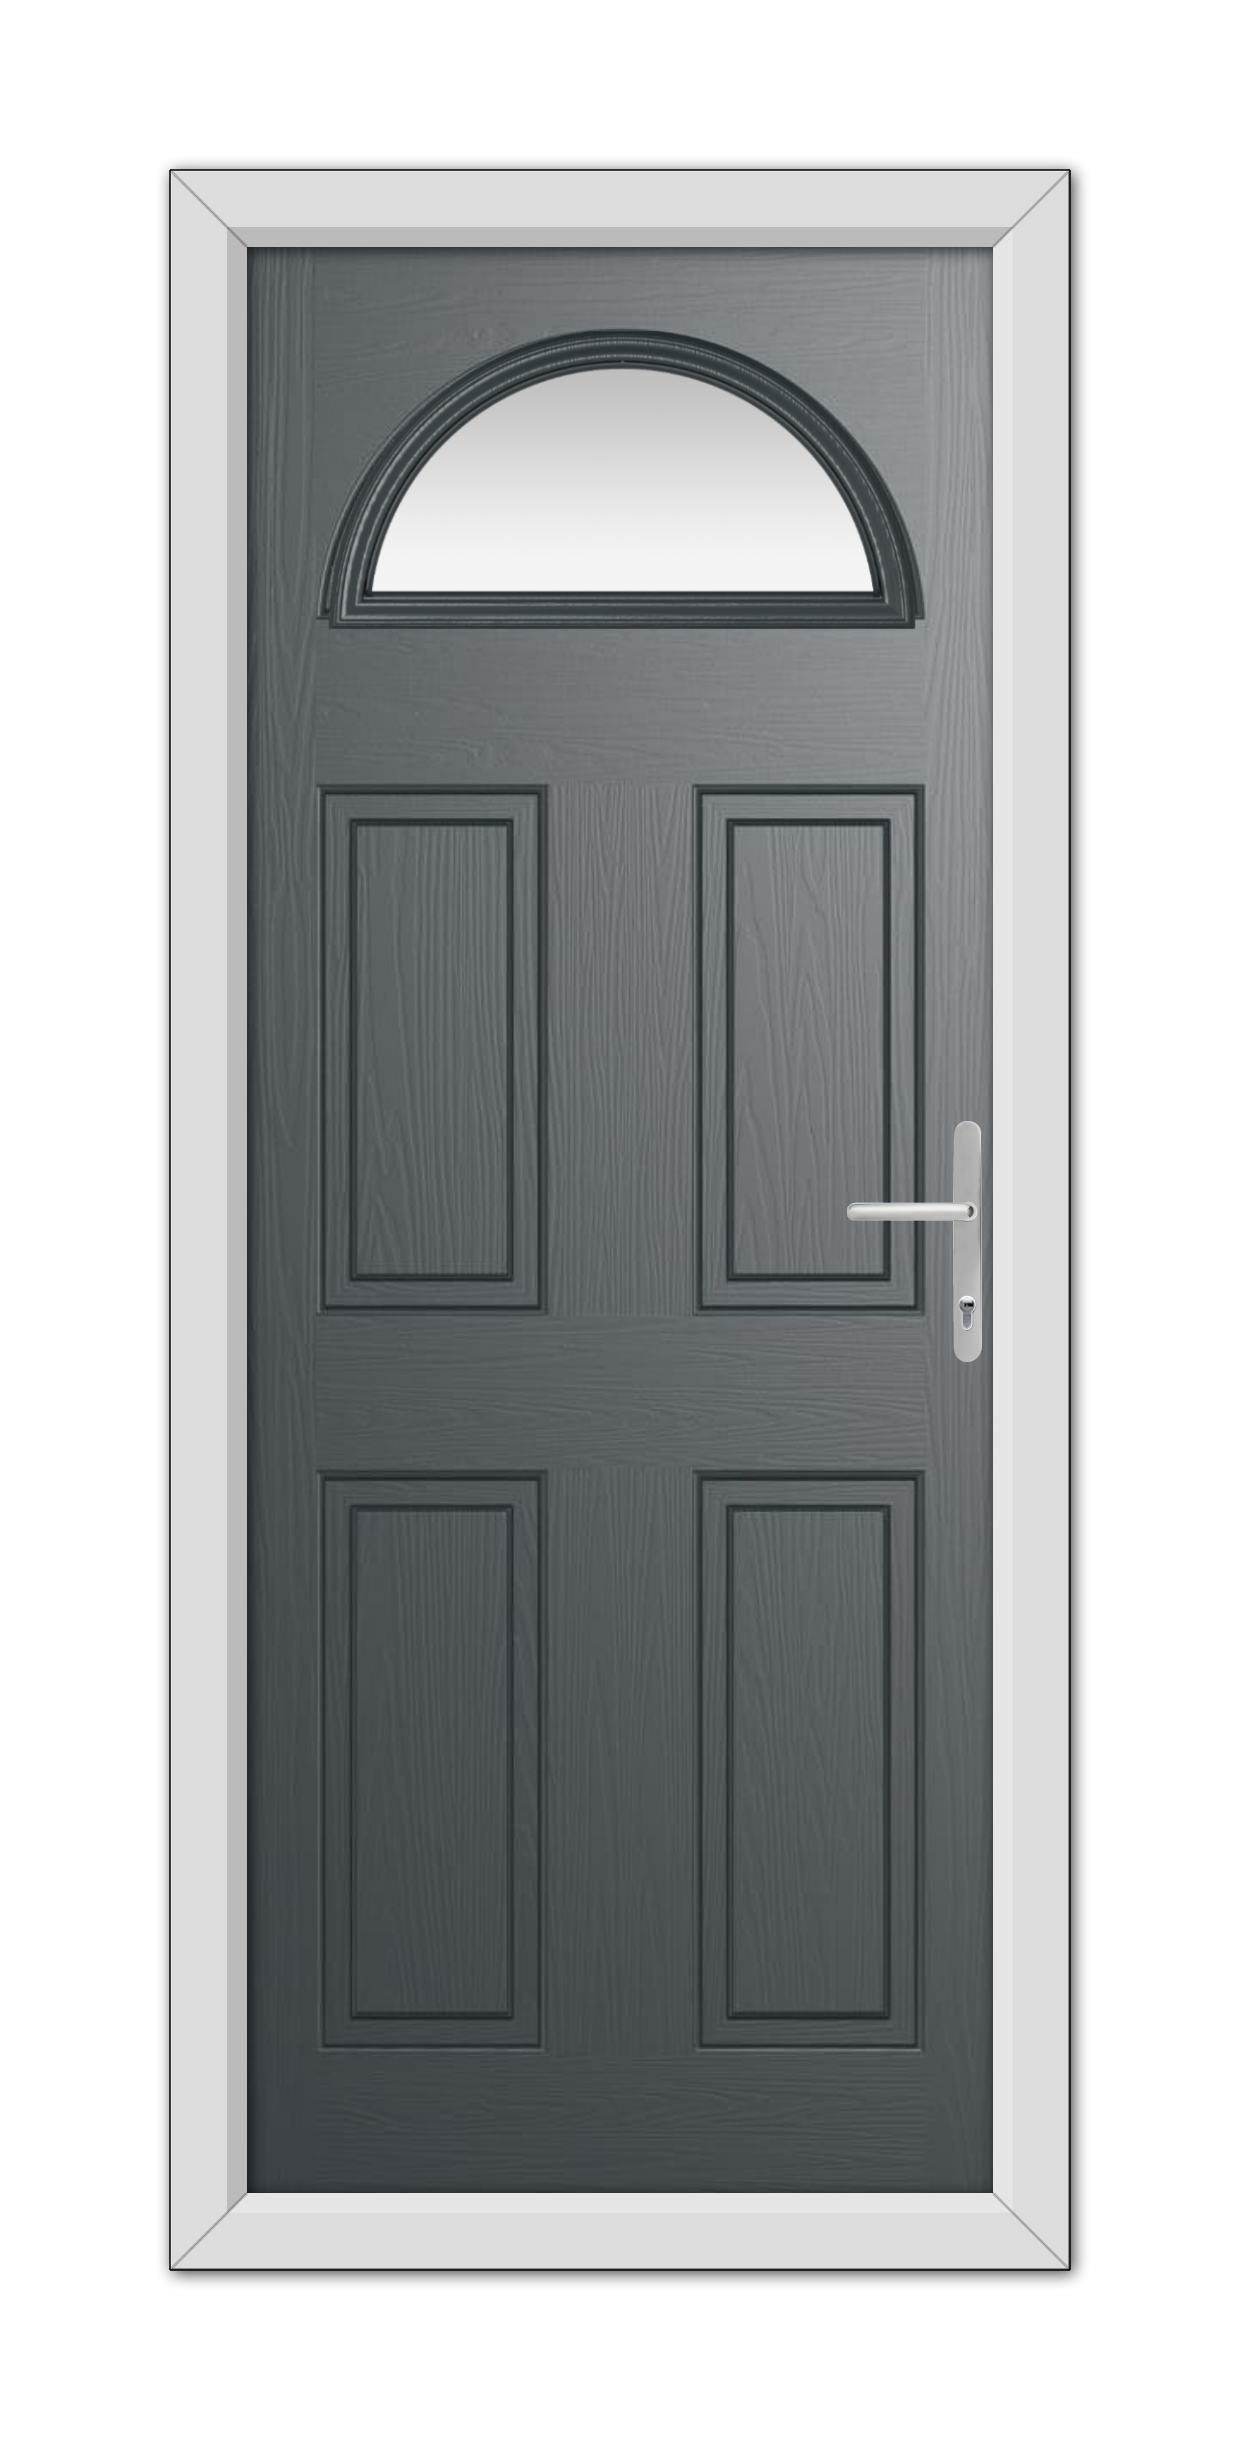 A modern Anthracite Grey Winslow 1 Composite Door 48mm Timber Core with six panels and a semi-circular window at the top, set in a white frame with a metal handle.